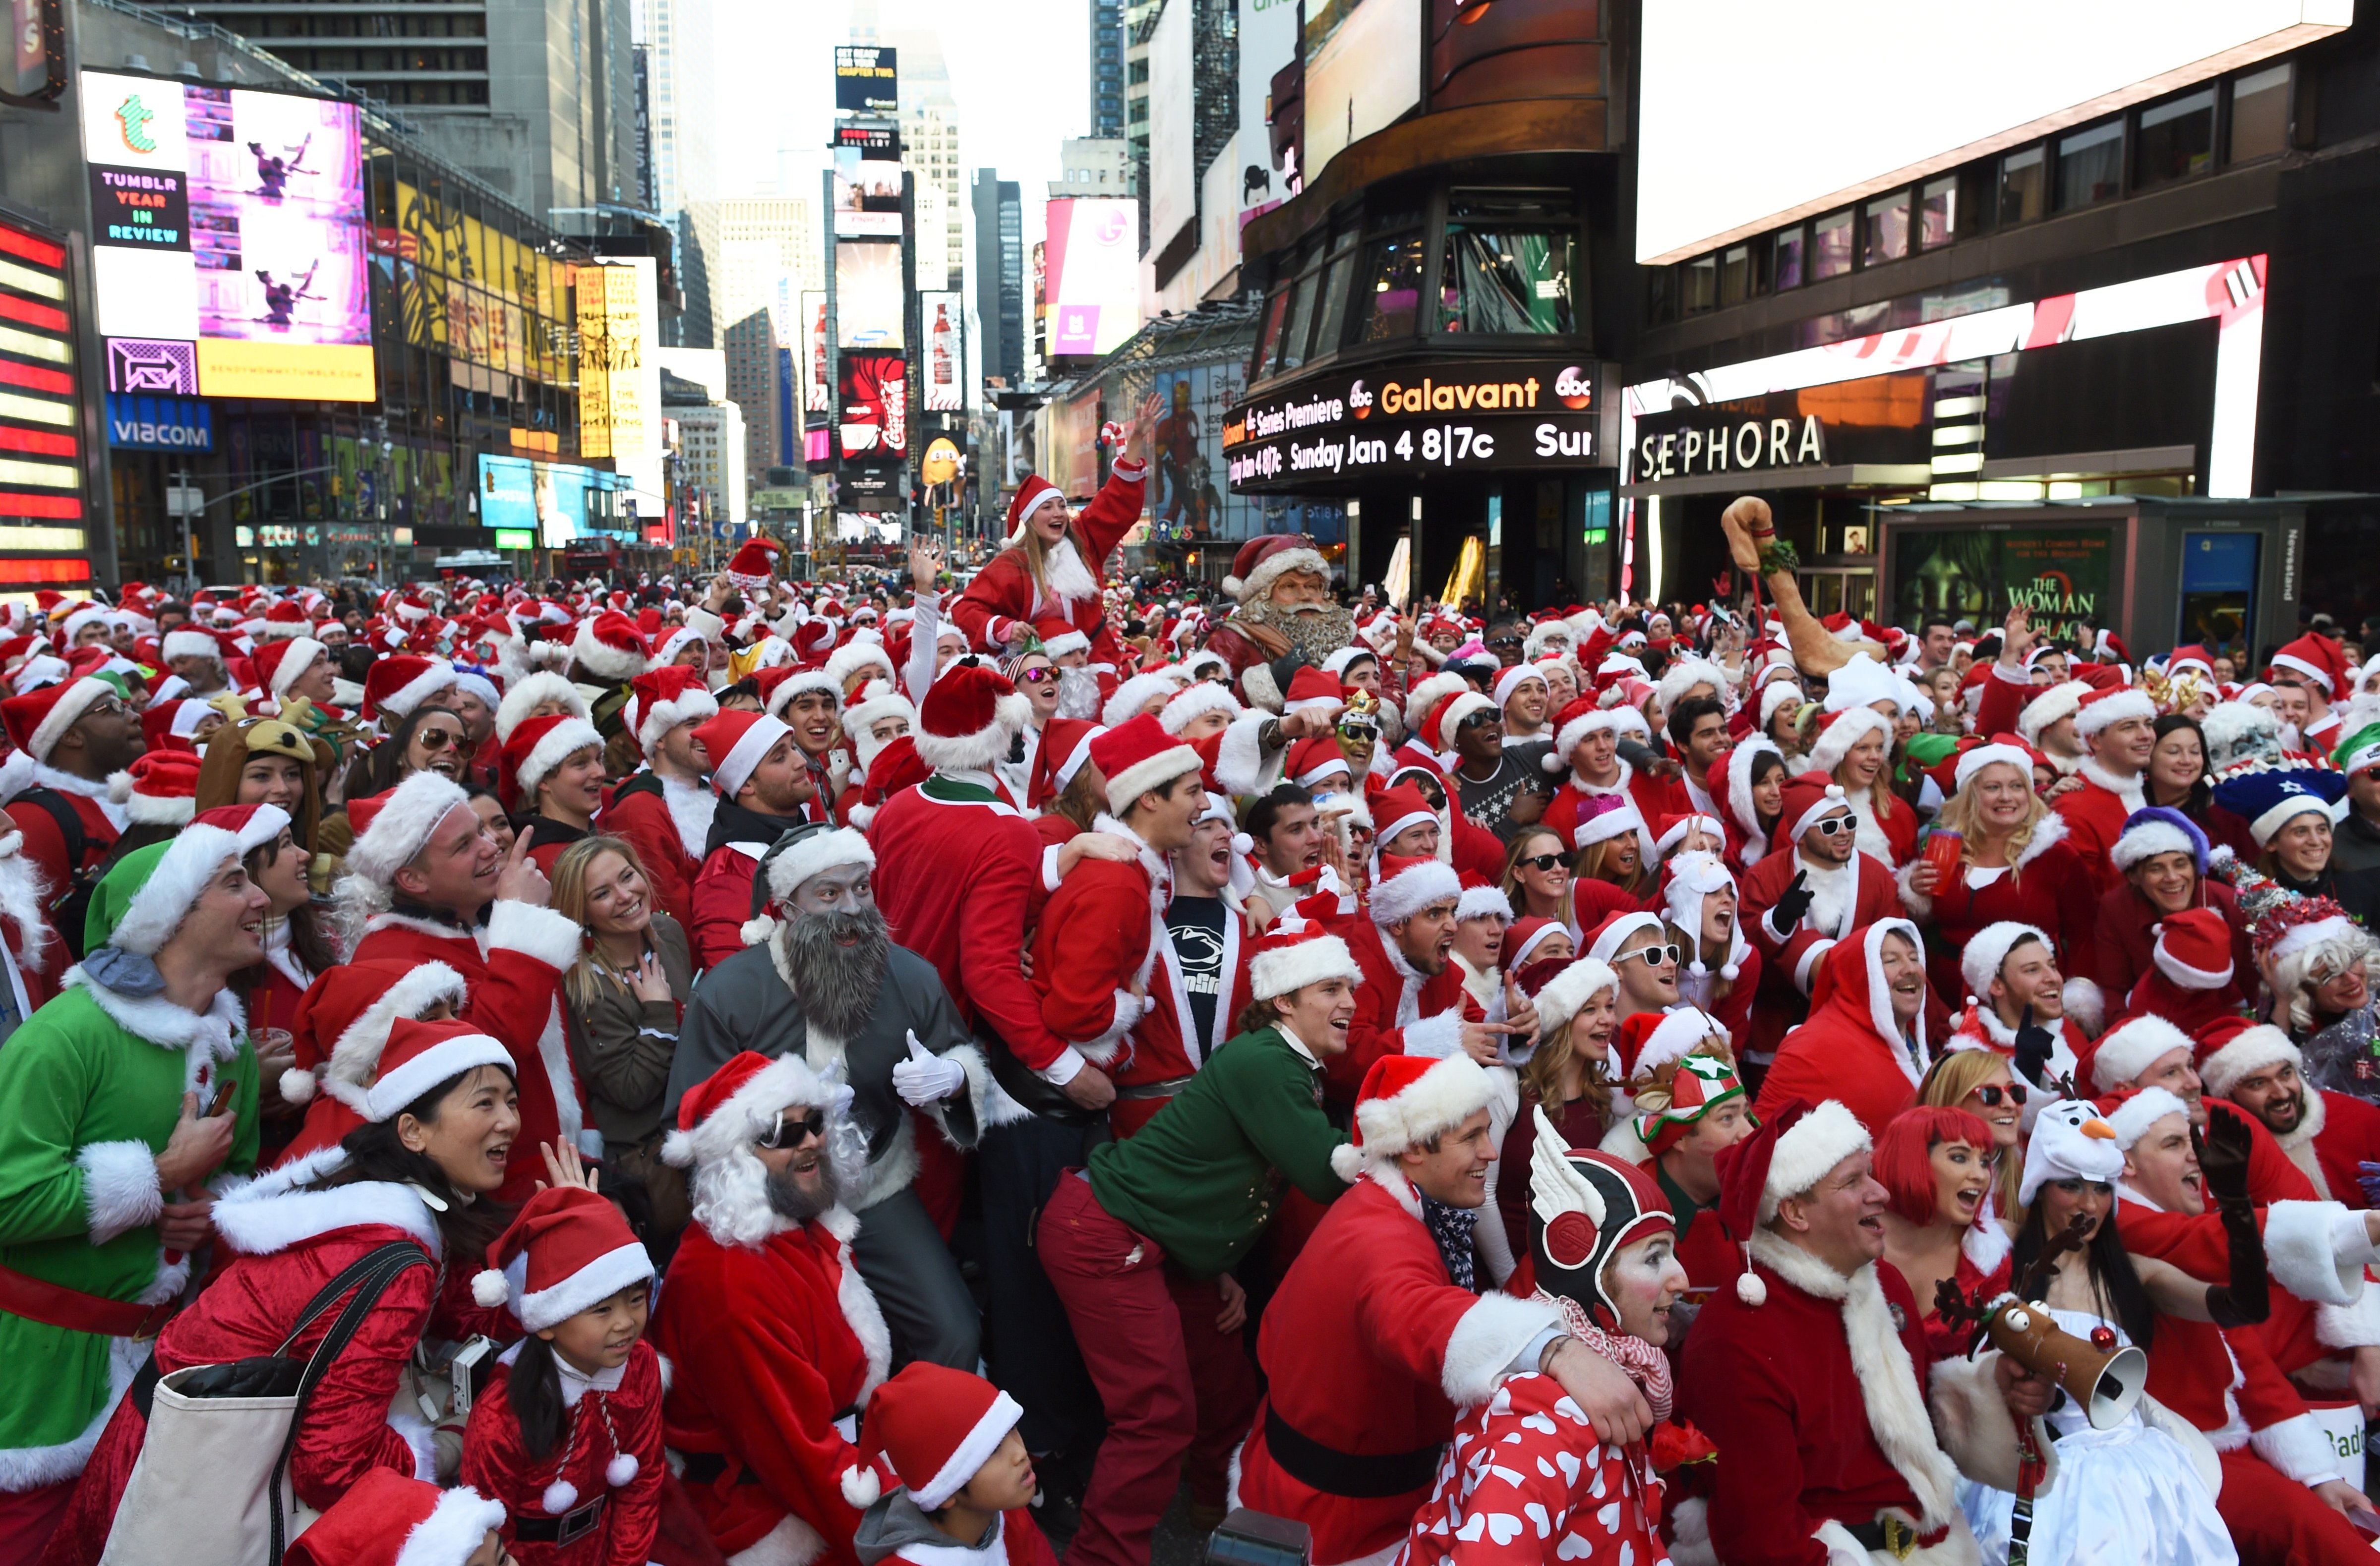 People dressed as Santa Claus and Mrs. Claus celebrate in Times Square as they gather for the annual Santacon festivities on Dec. 13, 2014 in New York. (Don Emmert—AFP/Getty Images)